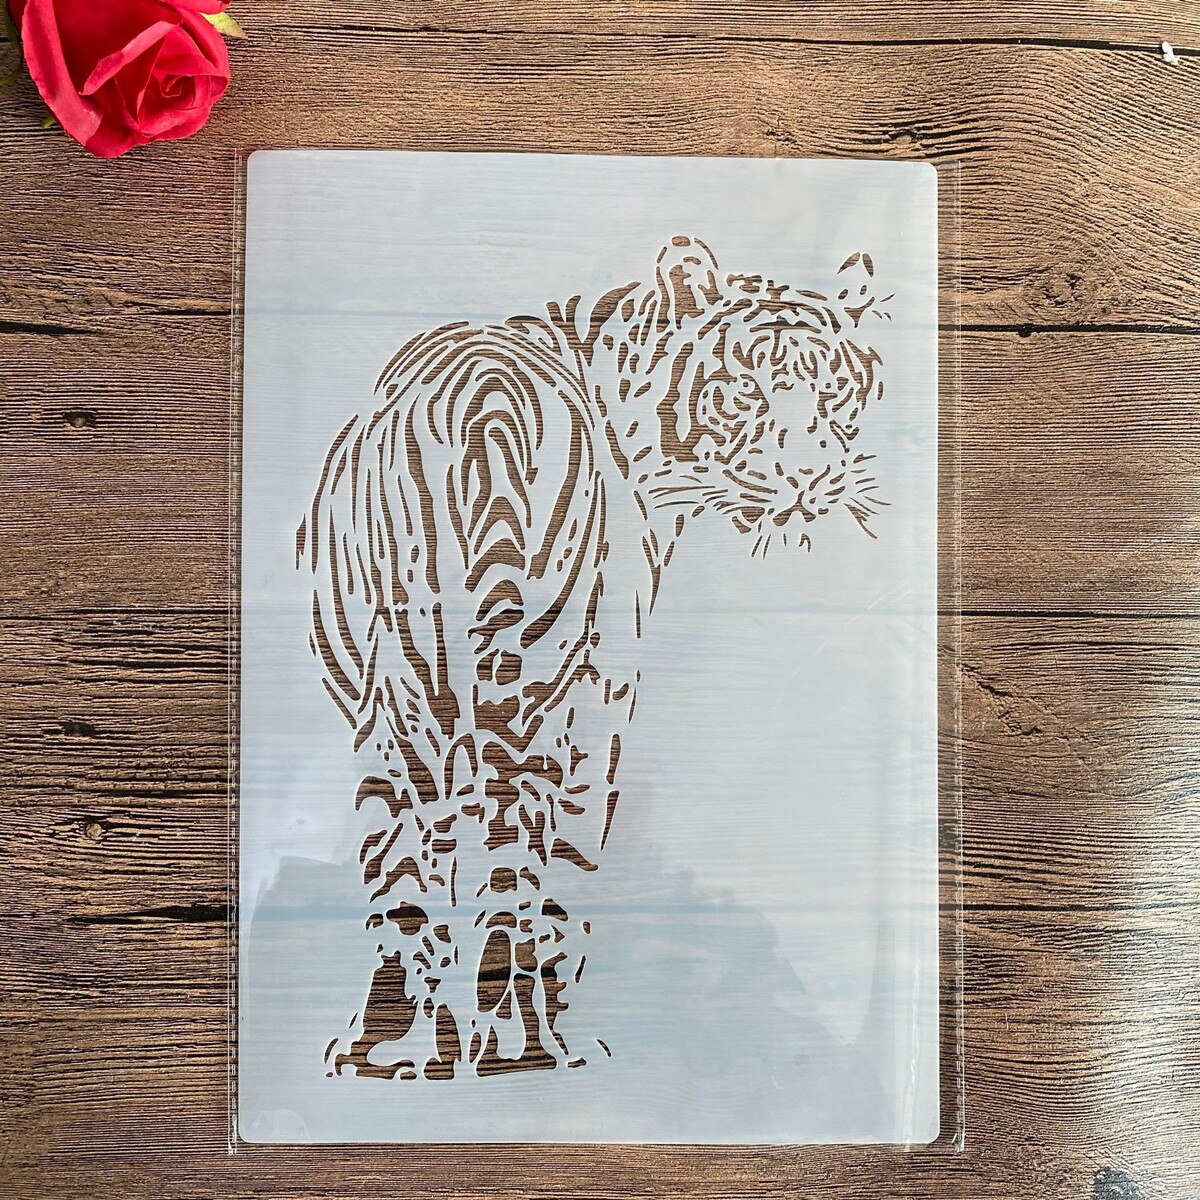 A4 size Stencil for Wall Painting Scrapbooking Stamp Album Decorative Embossing Craft Paper DIY Animal Tiger Stencils